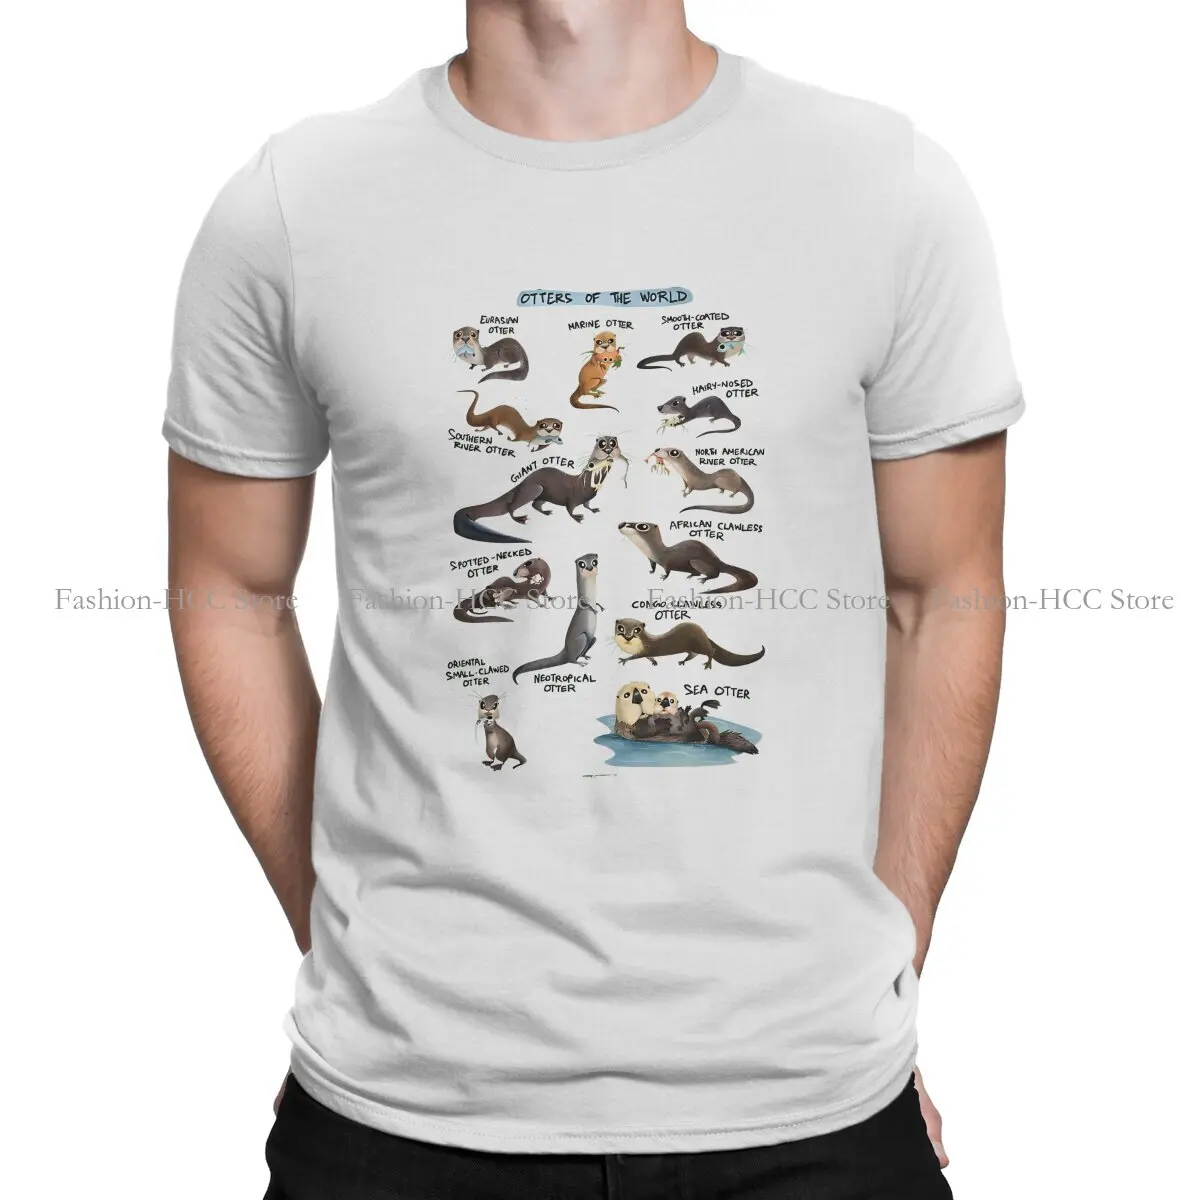 

Otter Polyester TShirts Otters Of The World Personalize Homme T Shirt Hipster Clothing